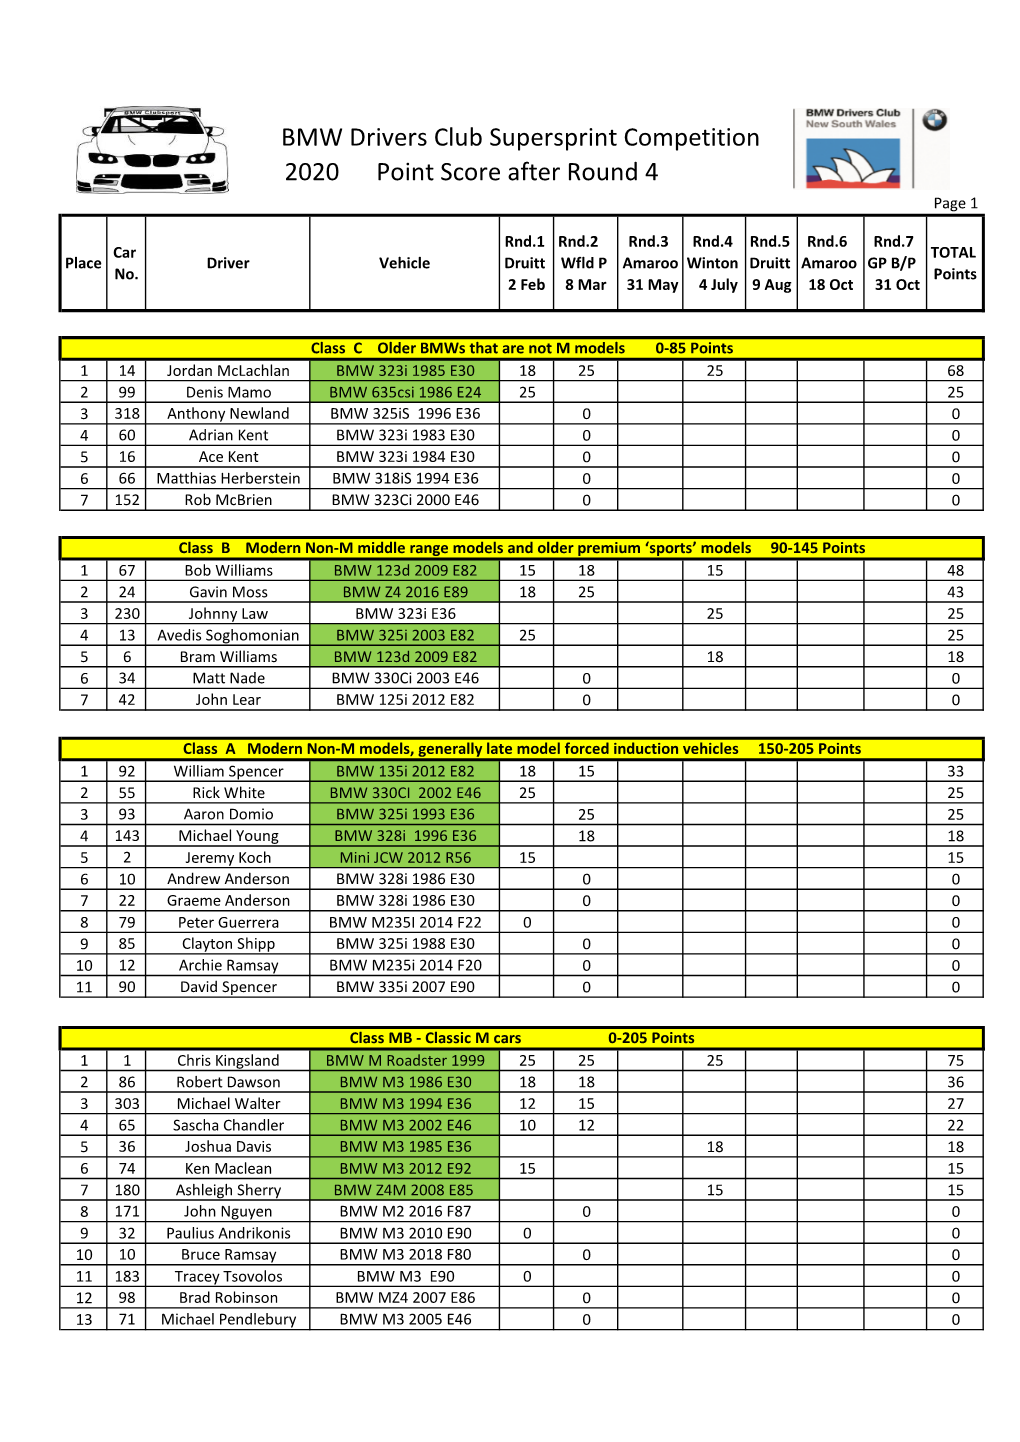 BMW Drivers Club Supersprint Competition 2020 Point Score After Round 4 Page 1